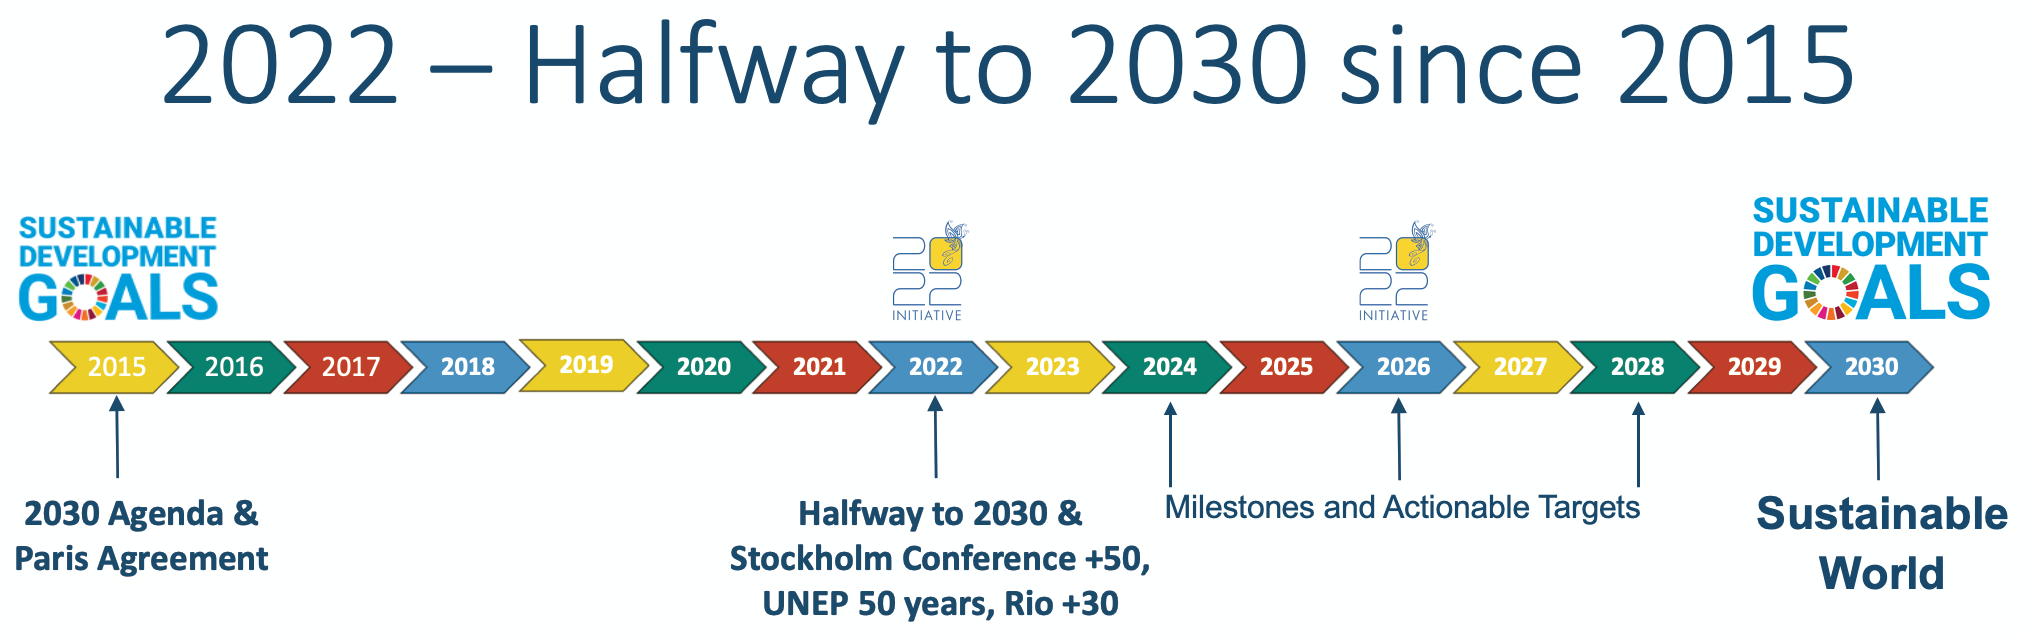 2022 - Halfway to 2030 since 2015